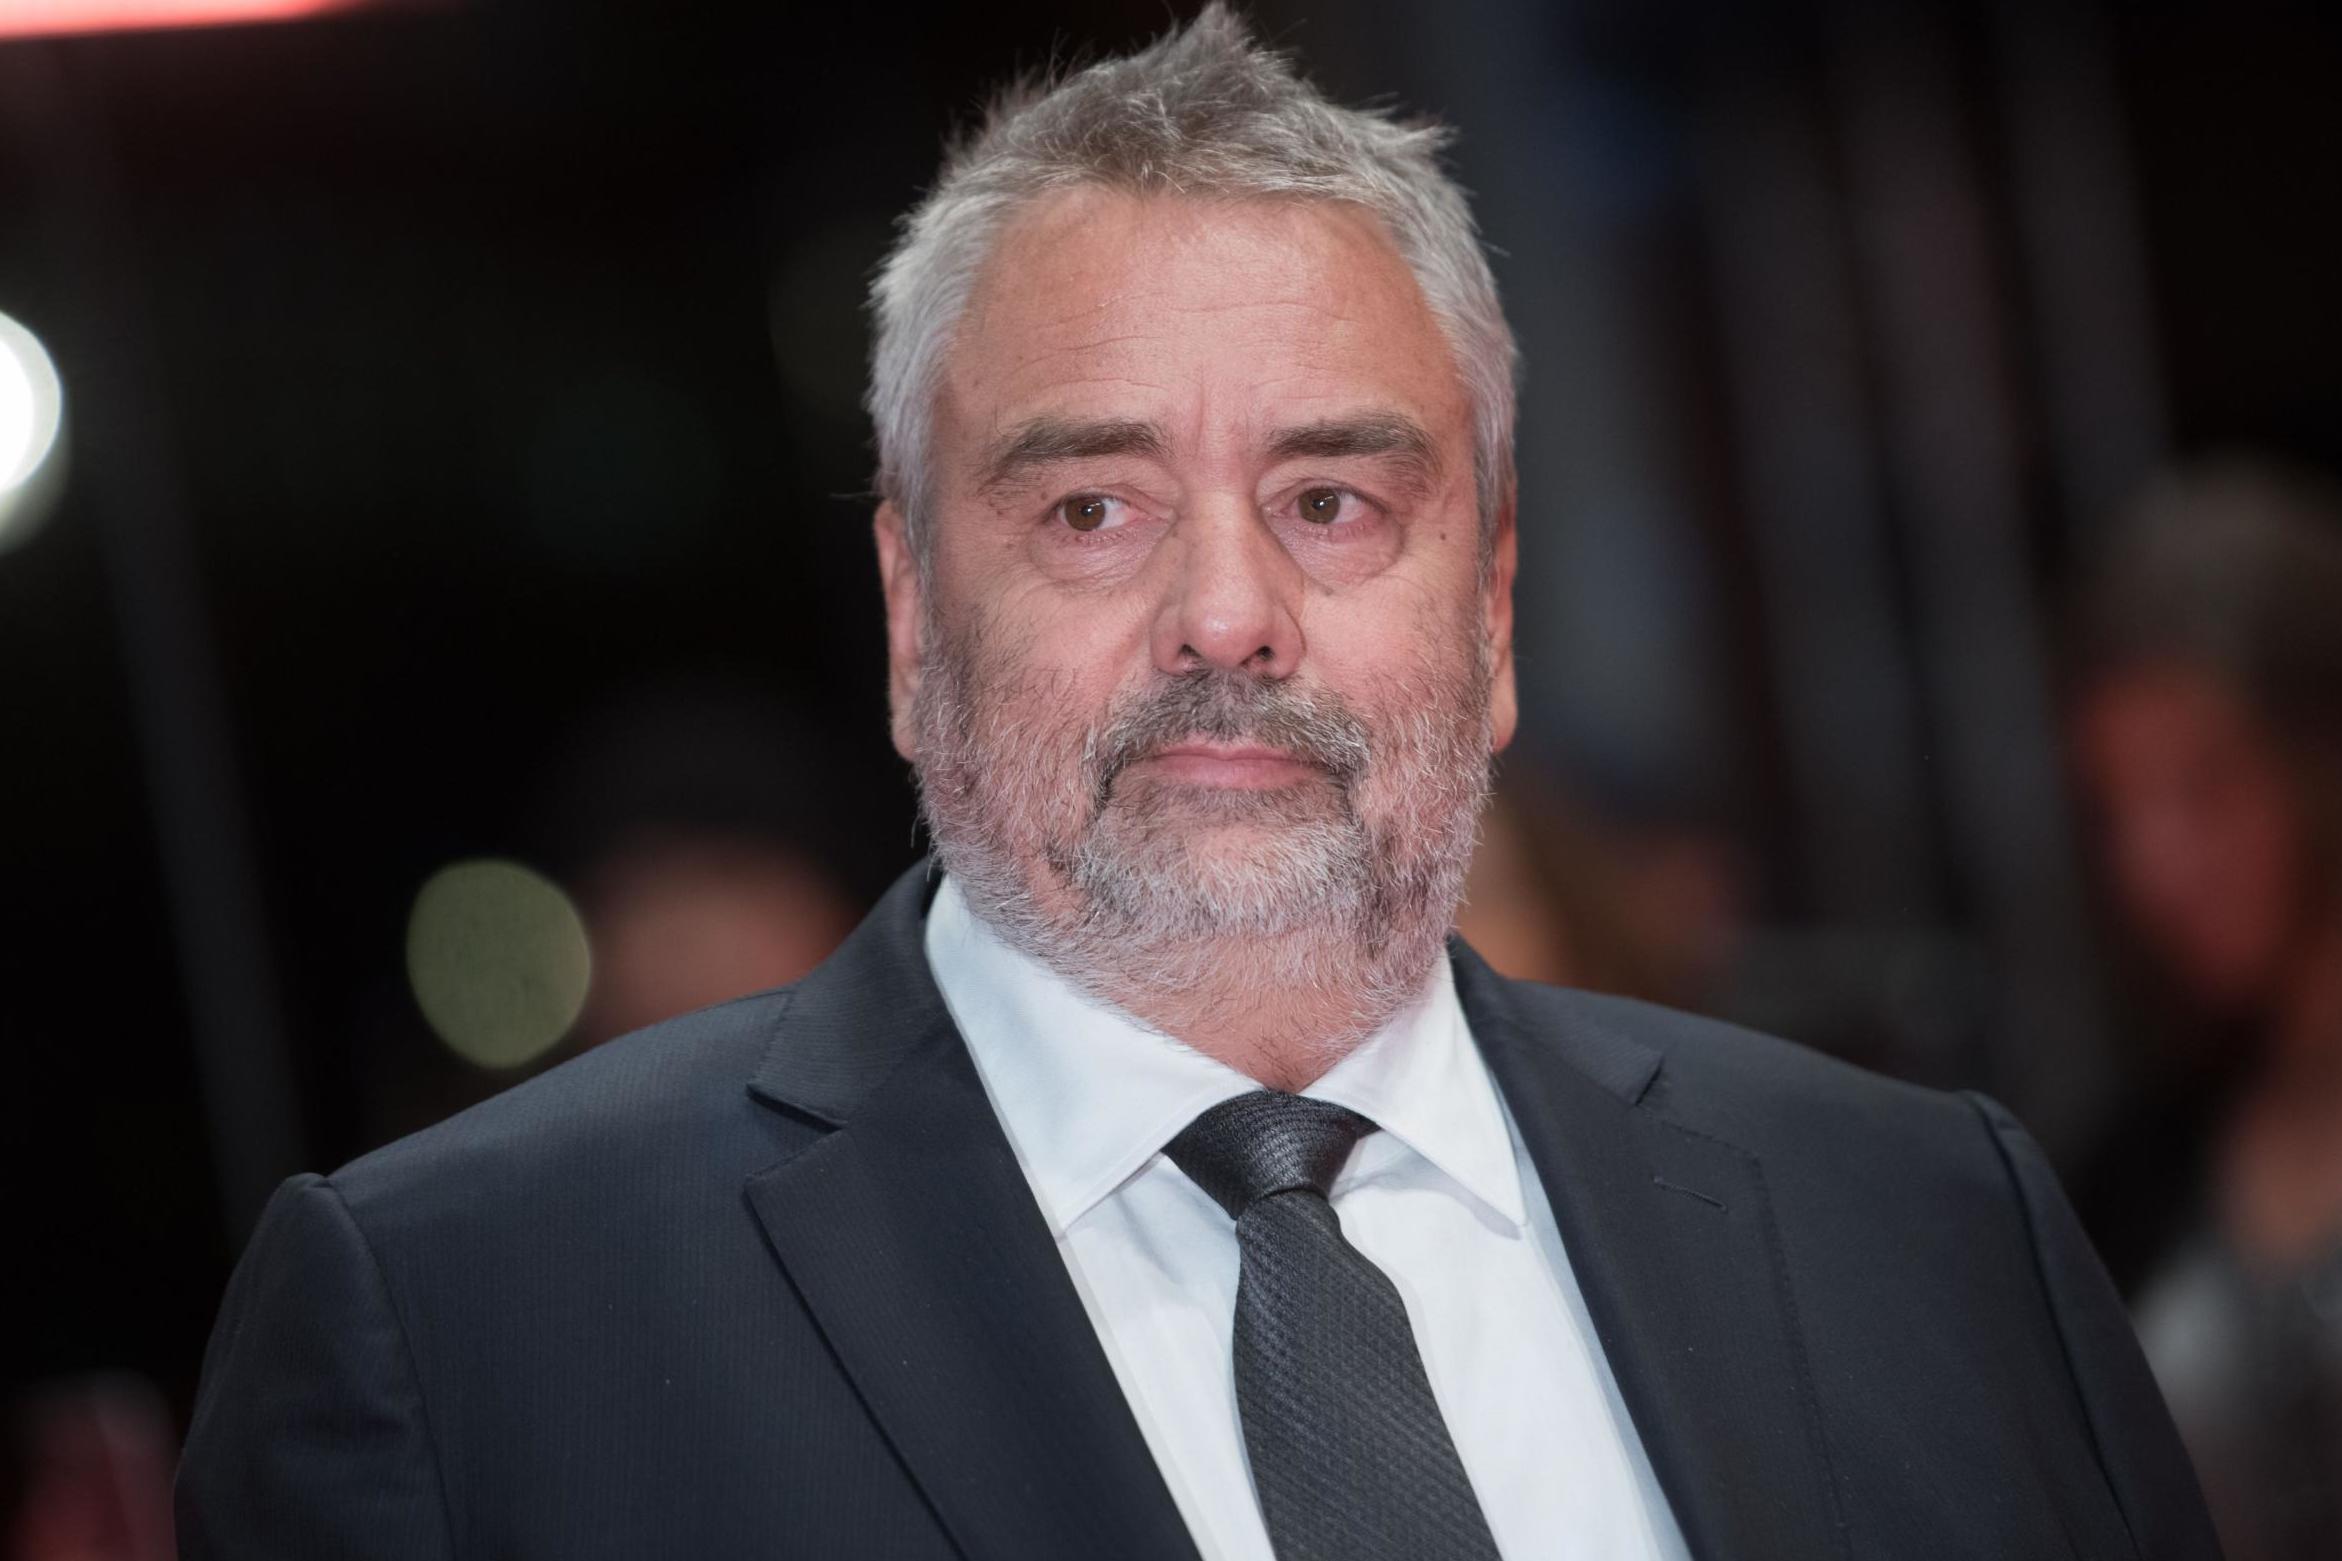 Luc Besson at the 68th Berlinale film festival on 17 February, 2018 in Berlin.